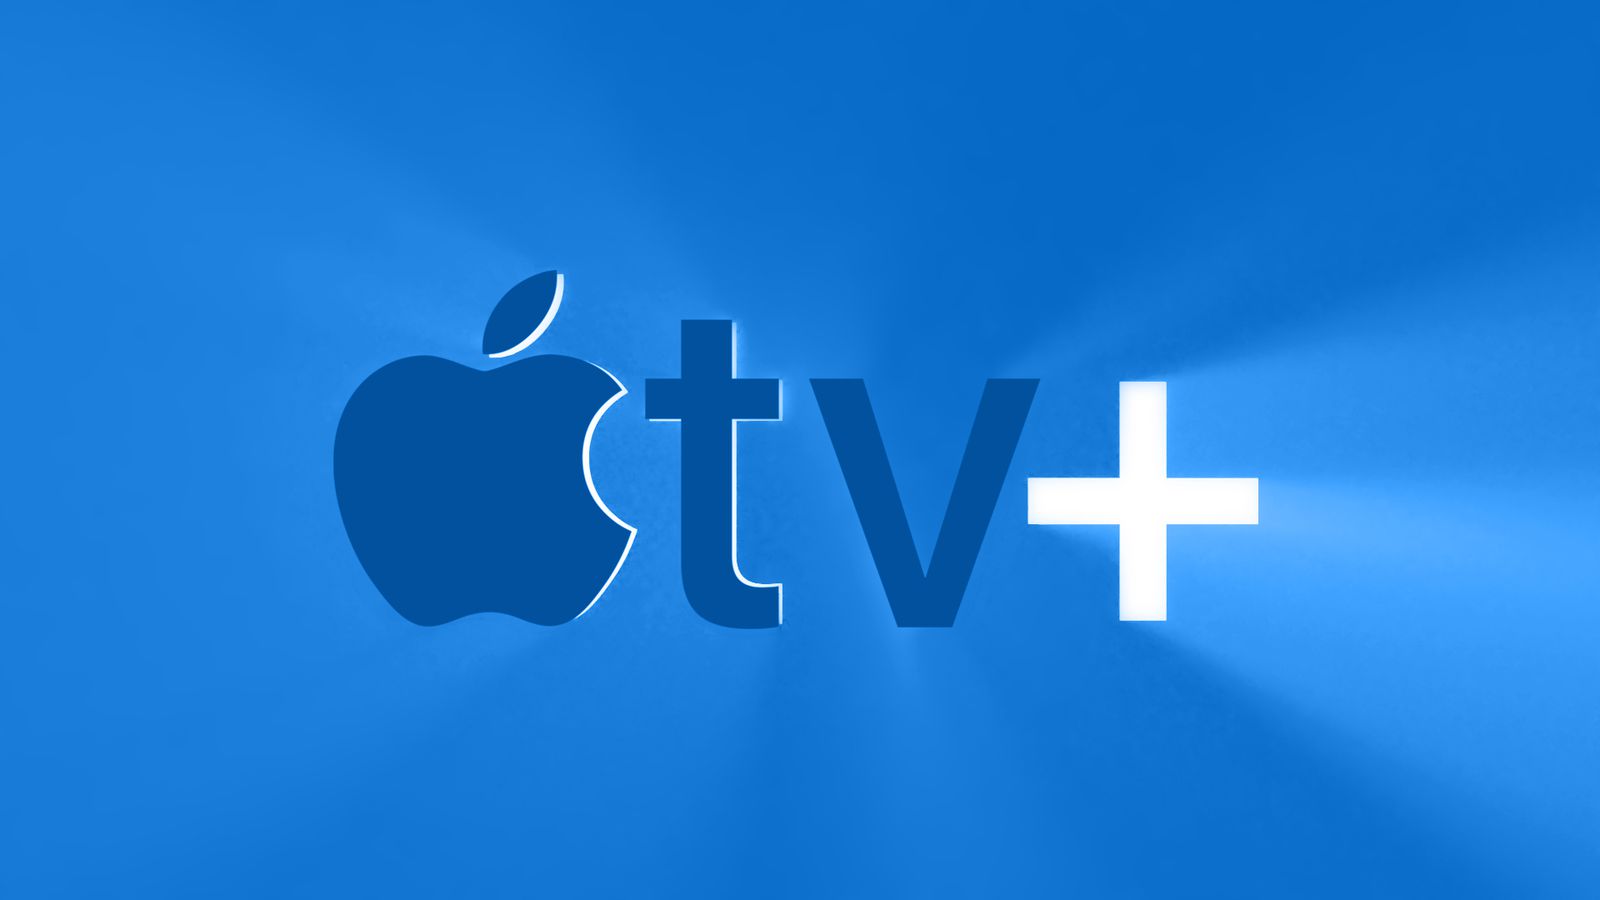 Apple will invest $500 million for its streaming service Apple TV+